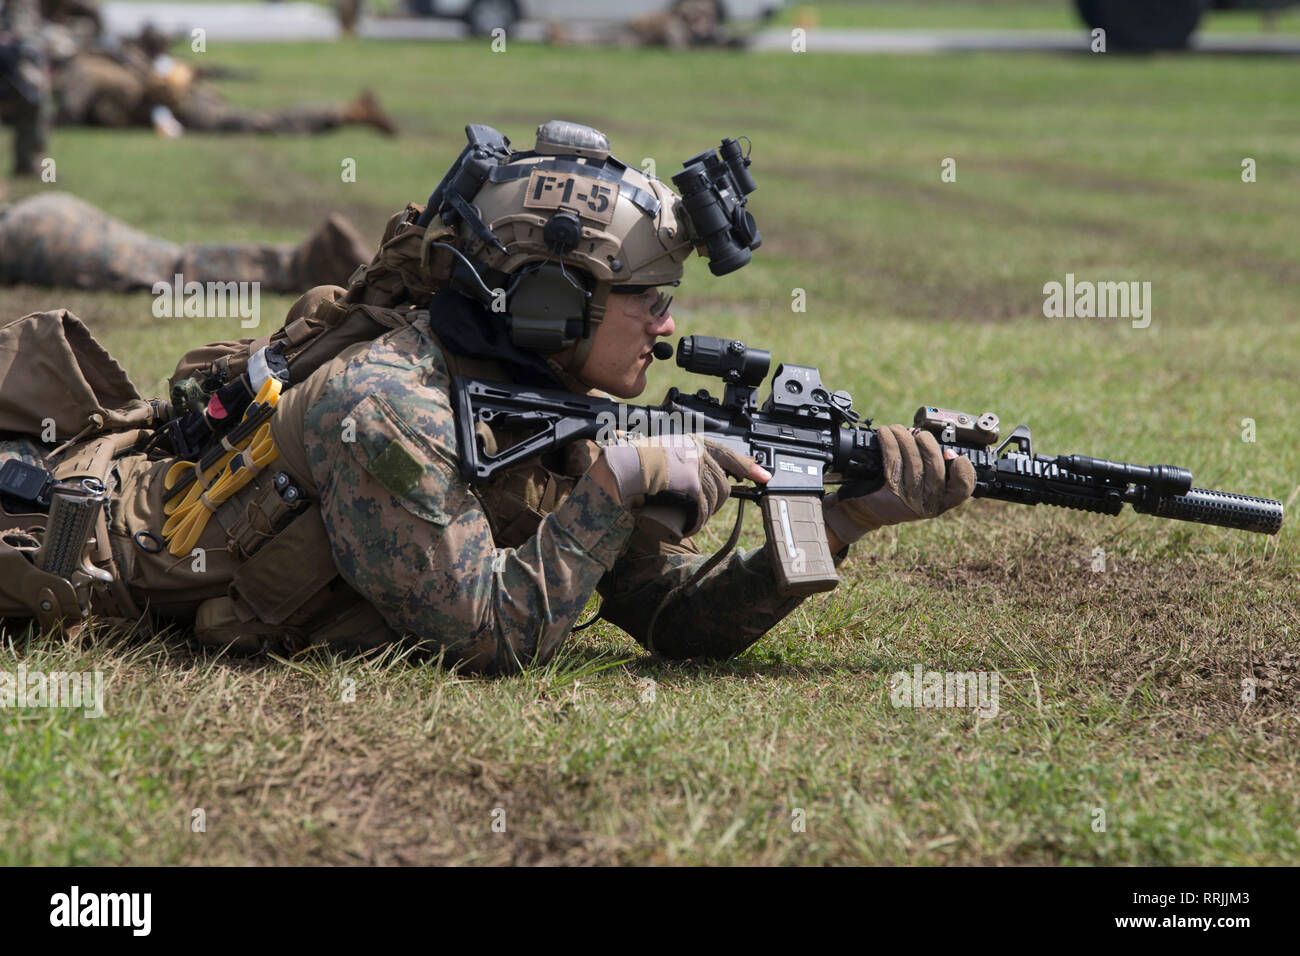 A Marine with the 31st Marine Expeditionary Unit’s Maritime Raid Force posts security during a simulated raid at Camp Hansen, Okinawa, Japan, Feb. 25, 2019. The 31st MEU, in a groundbreaking command and control exercise, is completing split operations across a large swath of the Indo-Pacific region encompassing at least four geographic locations – Okinawa, Japan; aboard the dock landing ship USS Ashland (LSD 48) in the South China Sea; aboard the amphibious transport dock USS Green Bay (LPD 20) in the Gulf of Thailand; and other undisclosed locations. This is the first time any Marine expediti Stock Photo